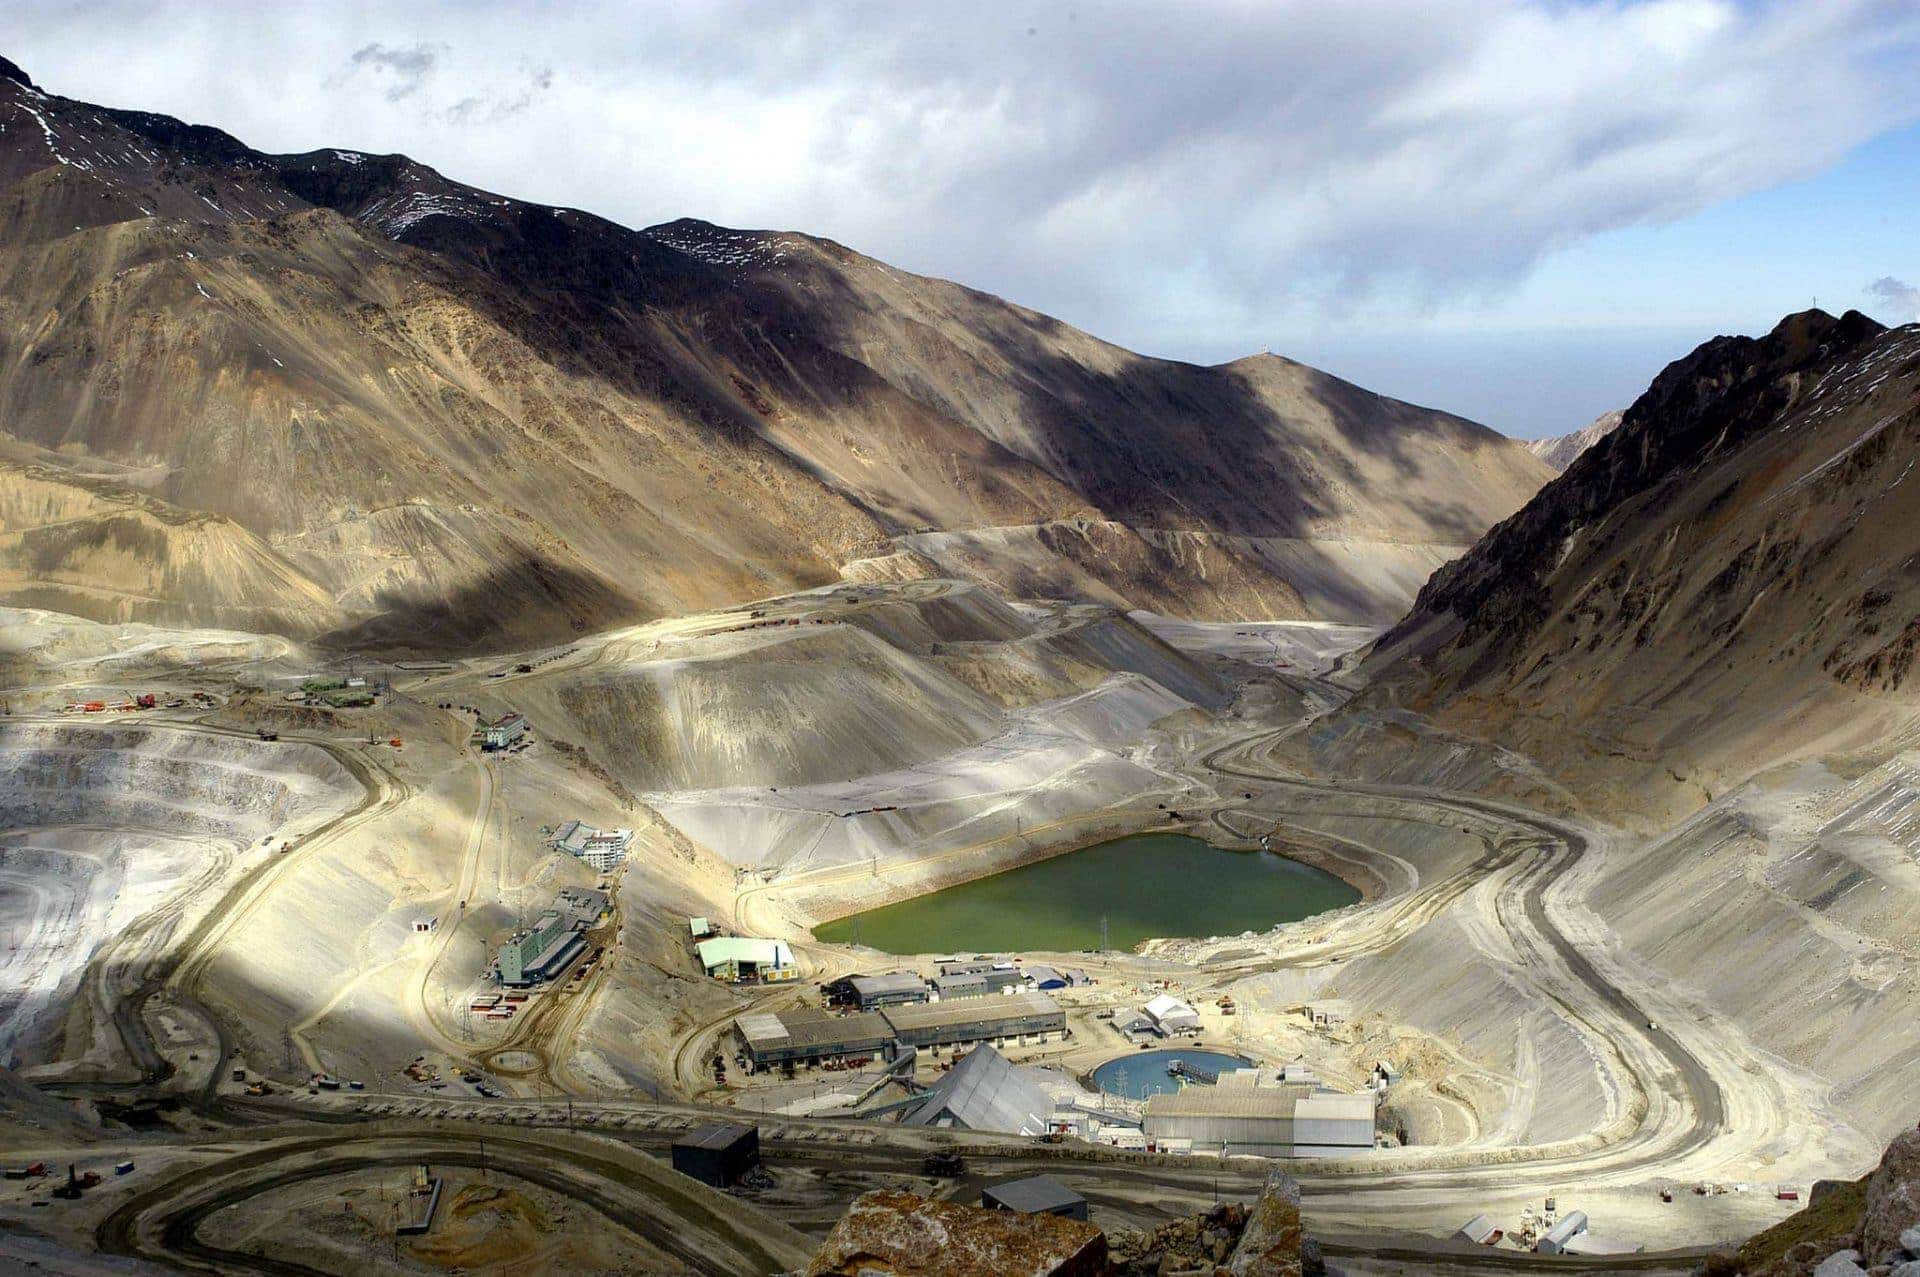 An expansive view of the los bronces mine in Chile